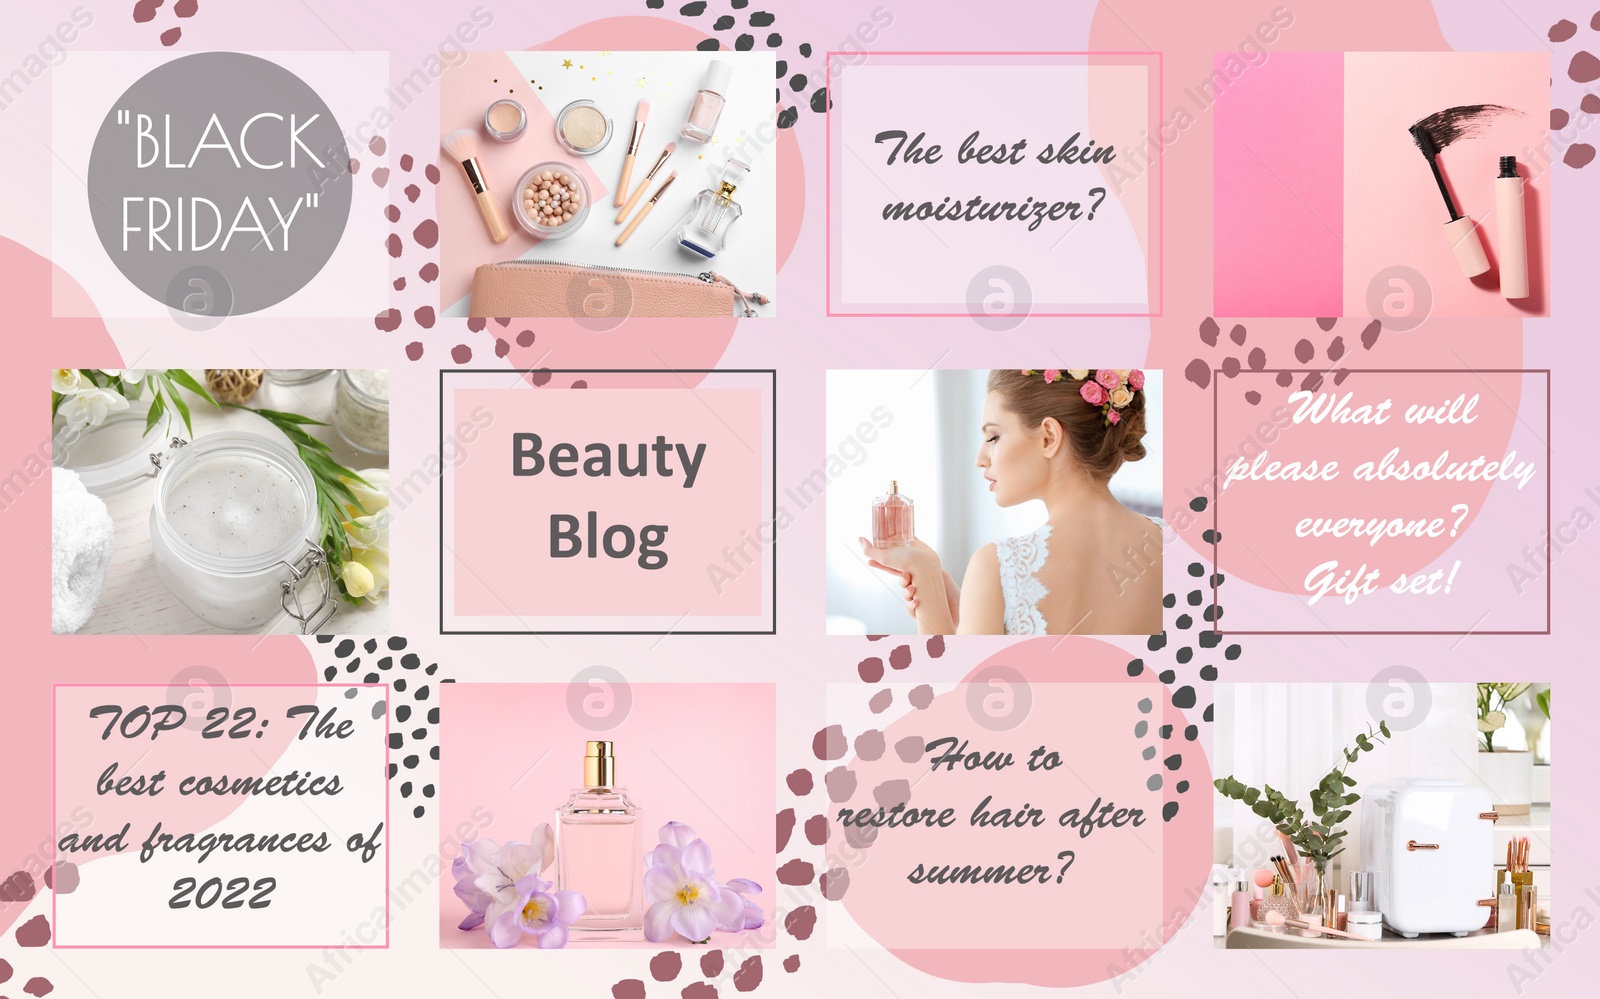 Image of Homepage design of beauty blog web site